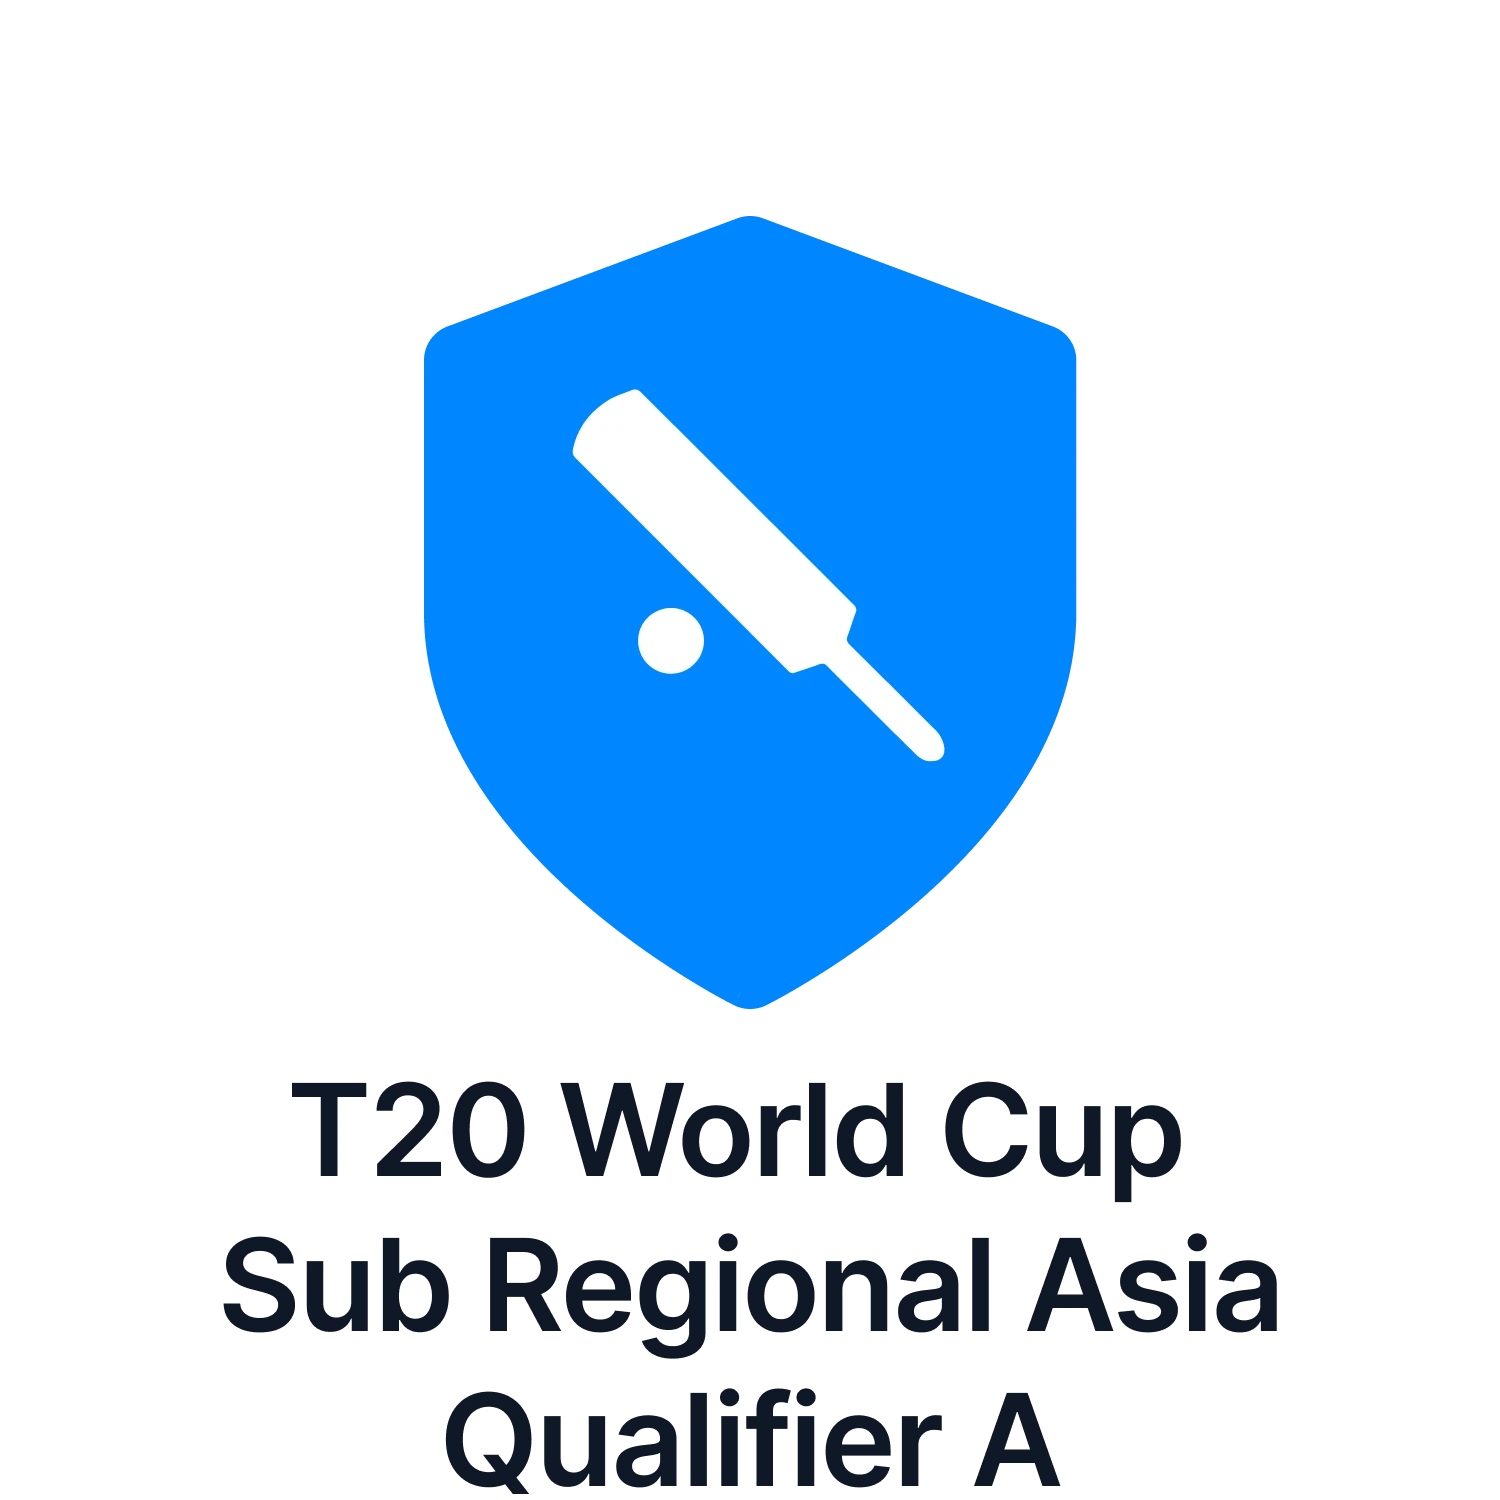 Read the expert predictions for T20 World Cup Sub Regional Asia Qualifier A.